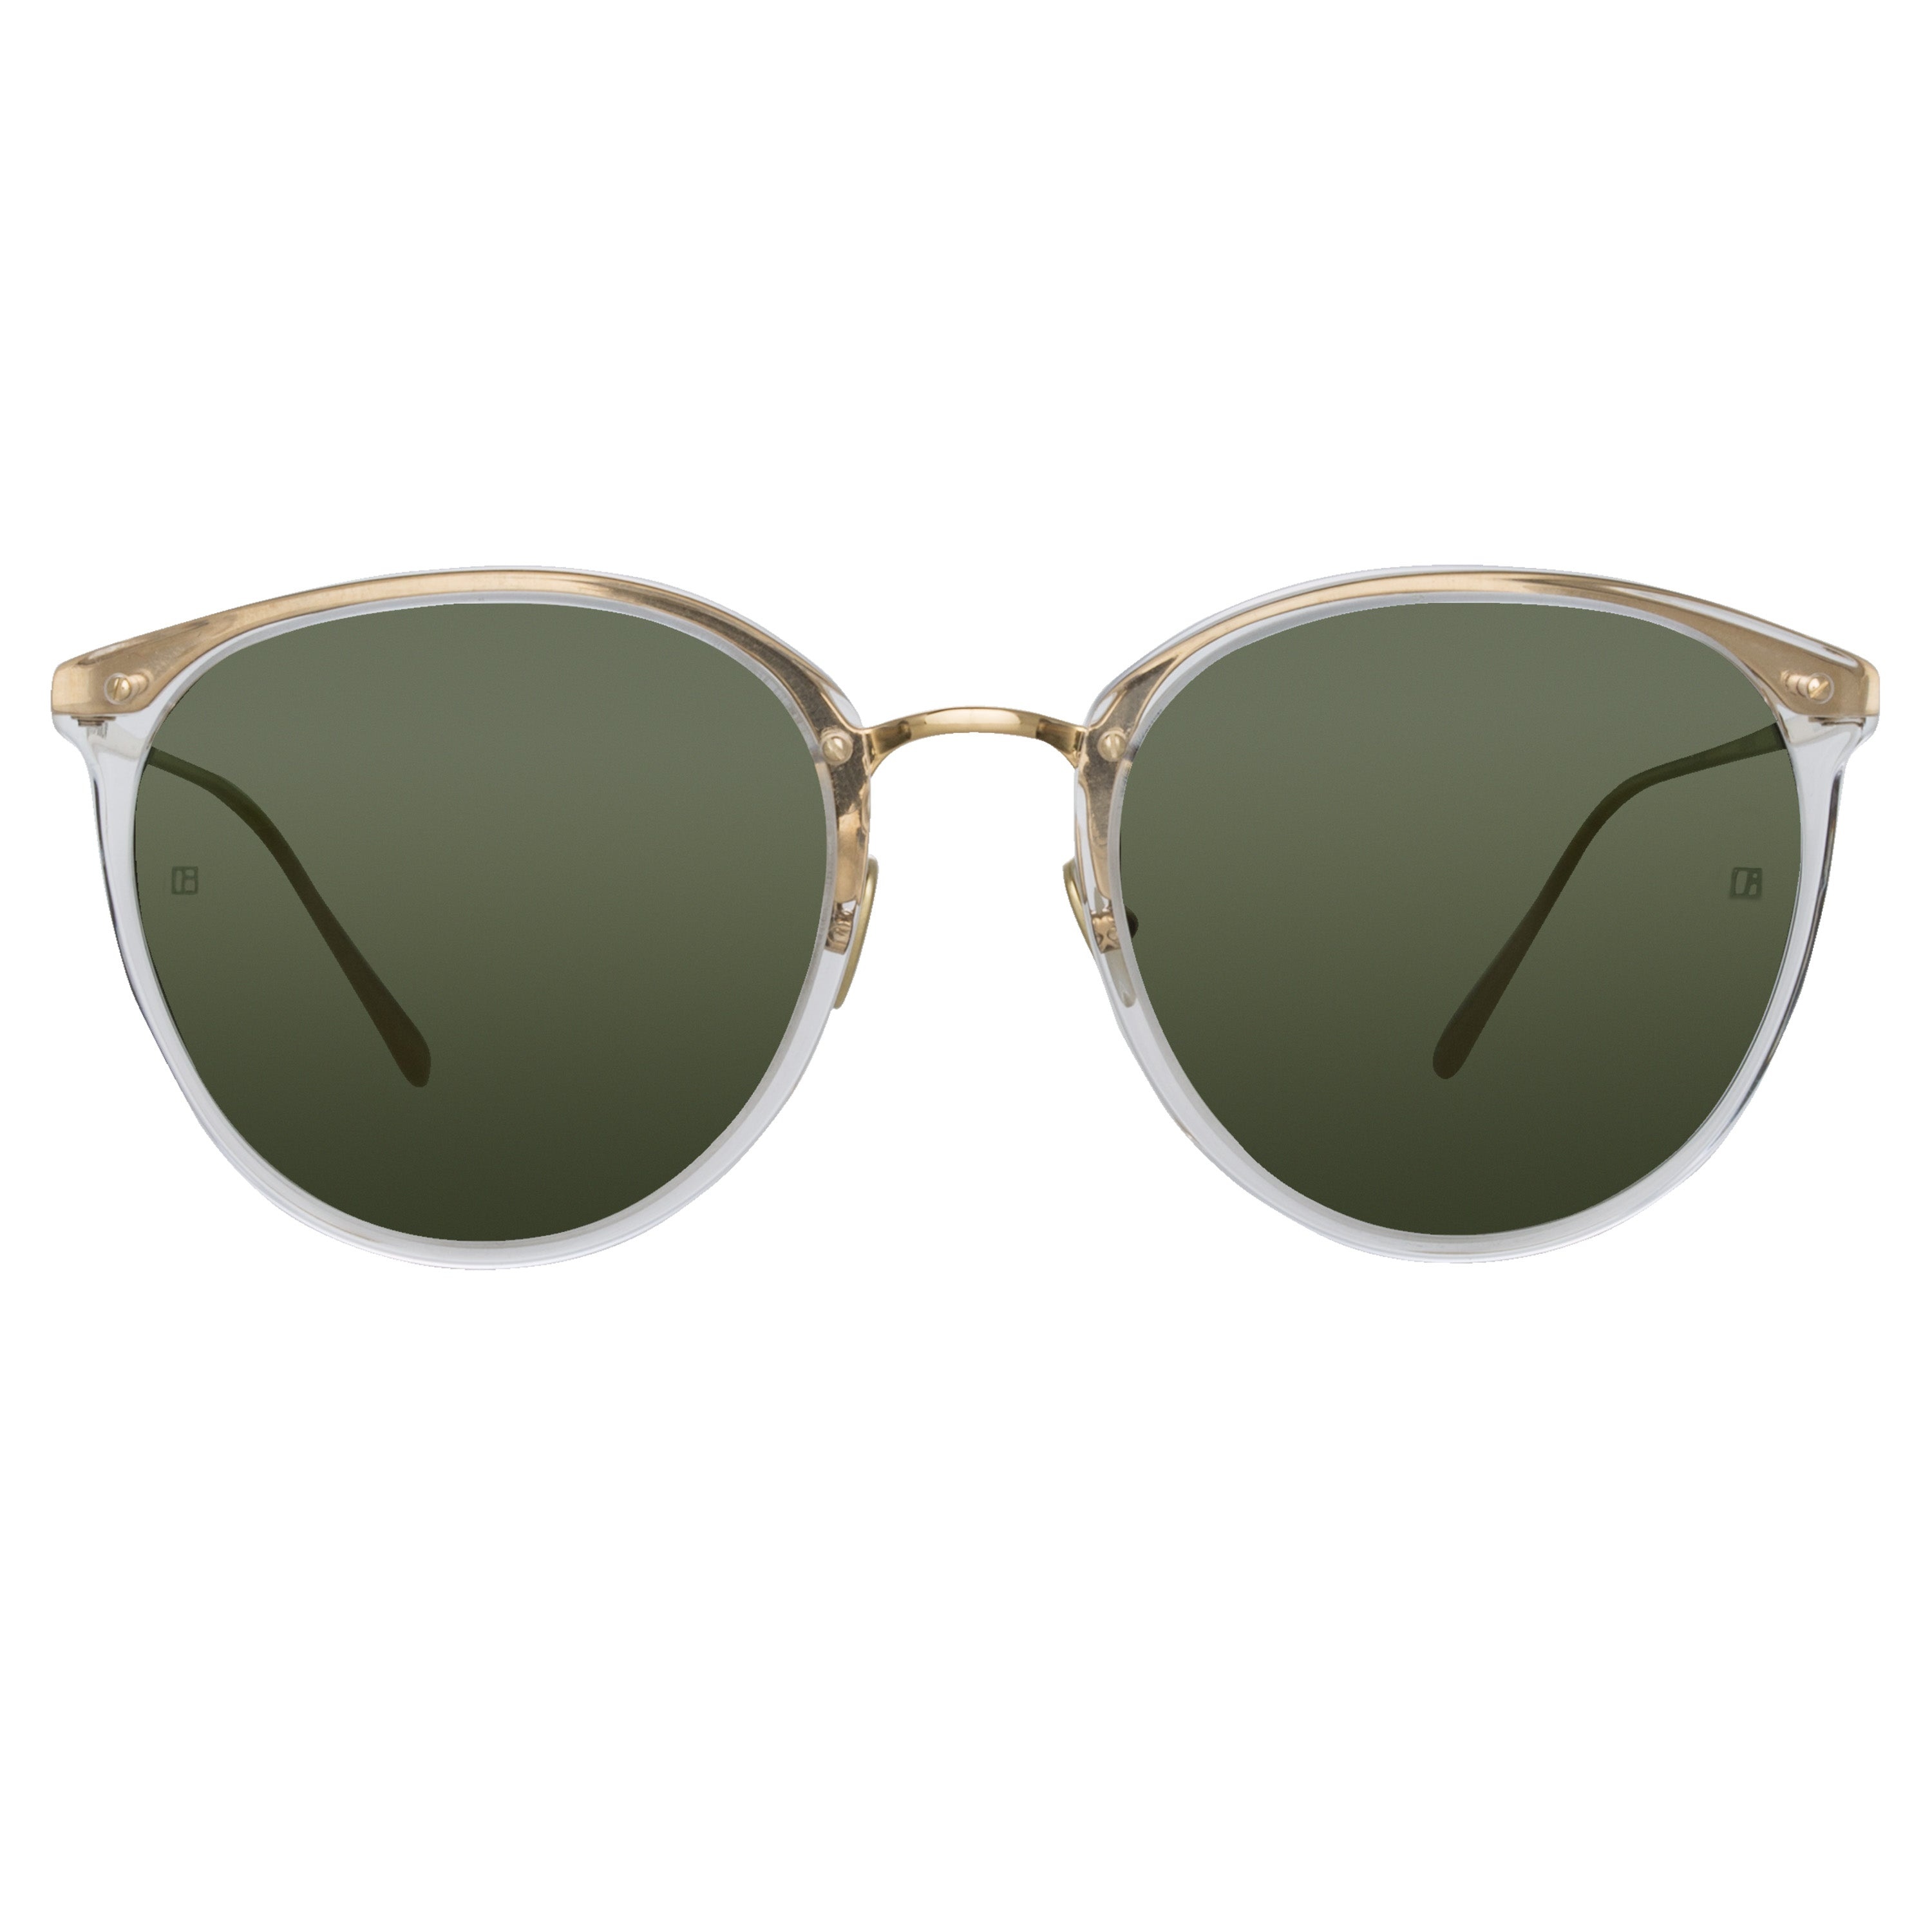 THE CALTHORPE |  OVAL SUNGLASSES IN CLEAR FRAME(C76) - 1